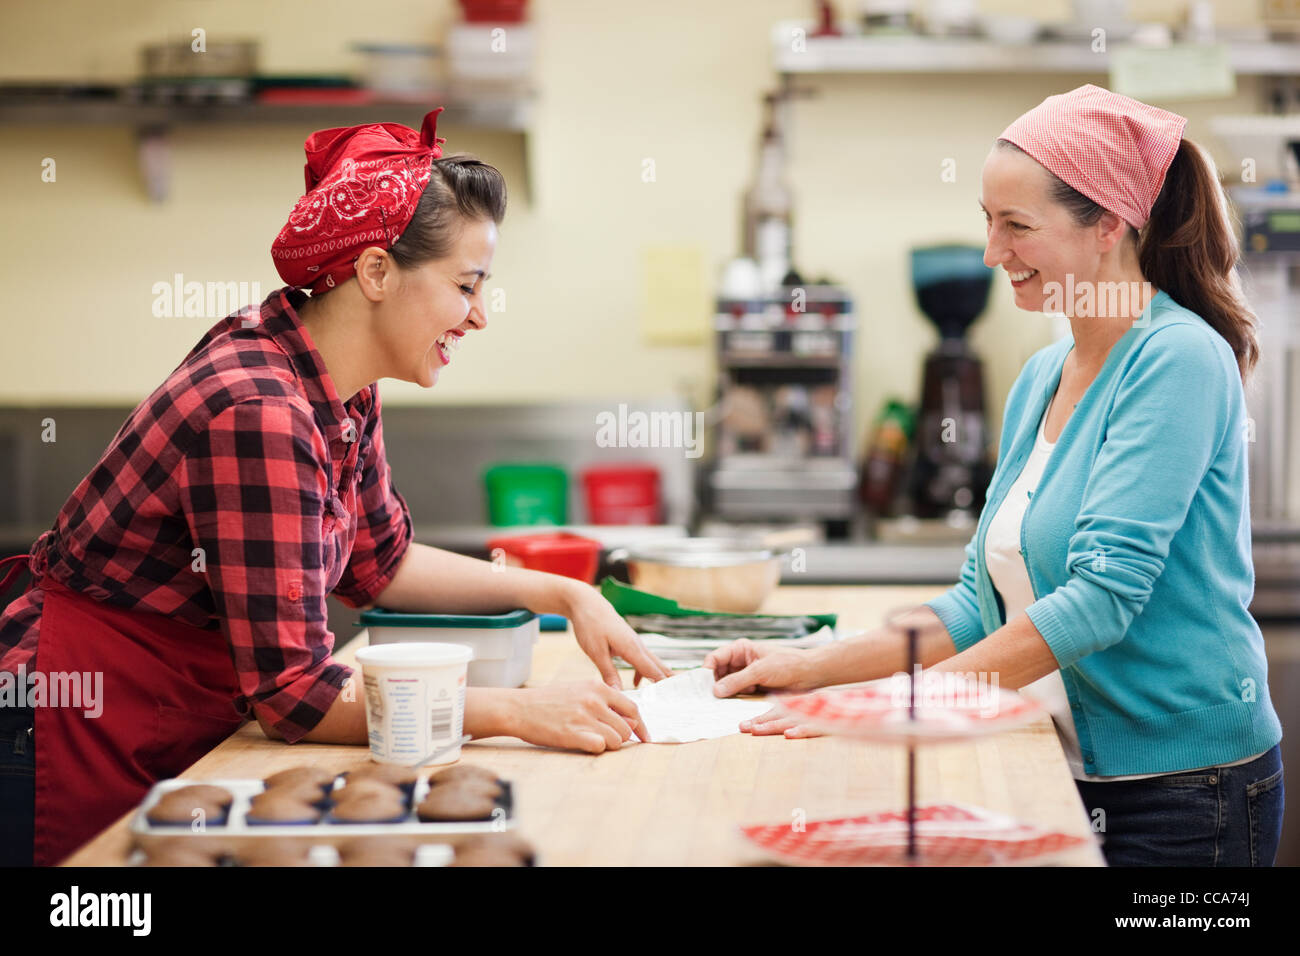 Women working together in commercial kitchen Stock Photo